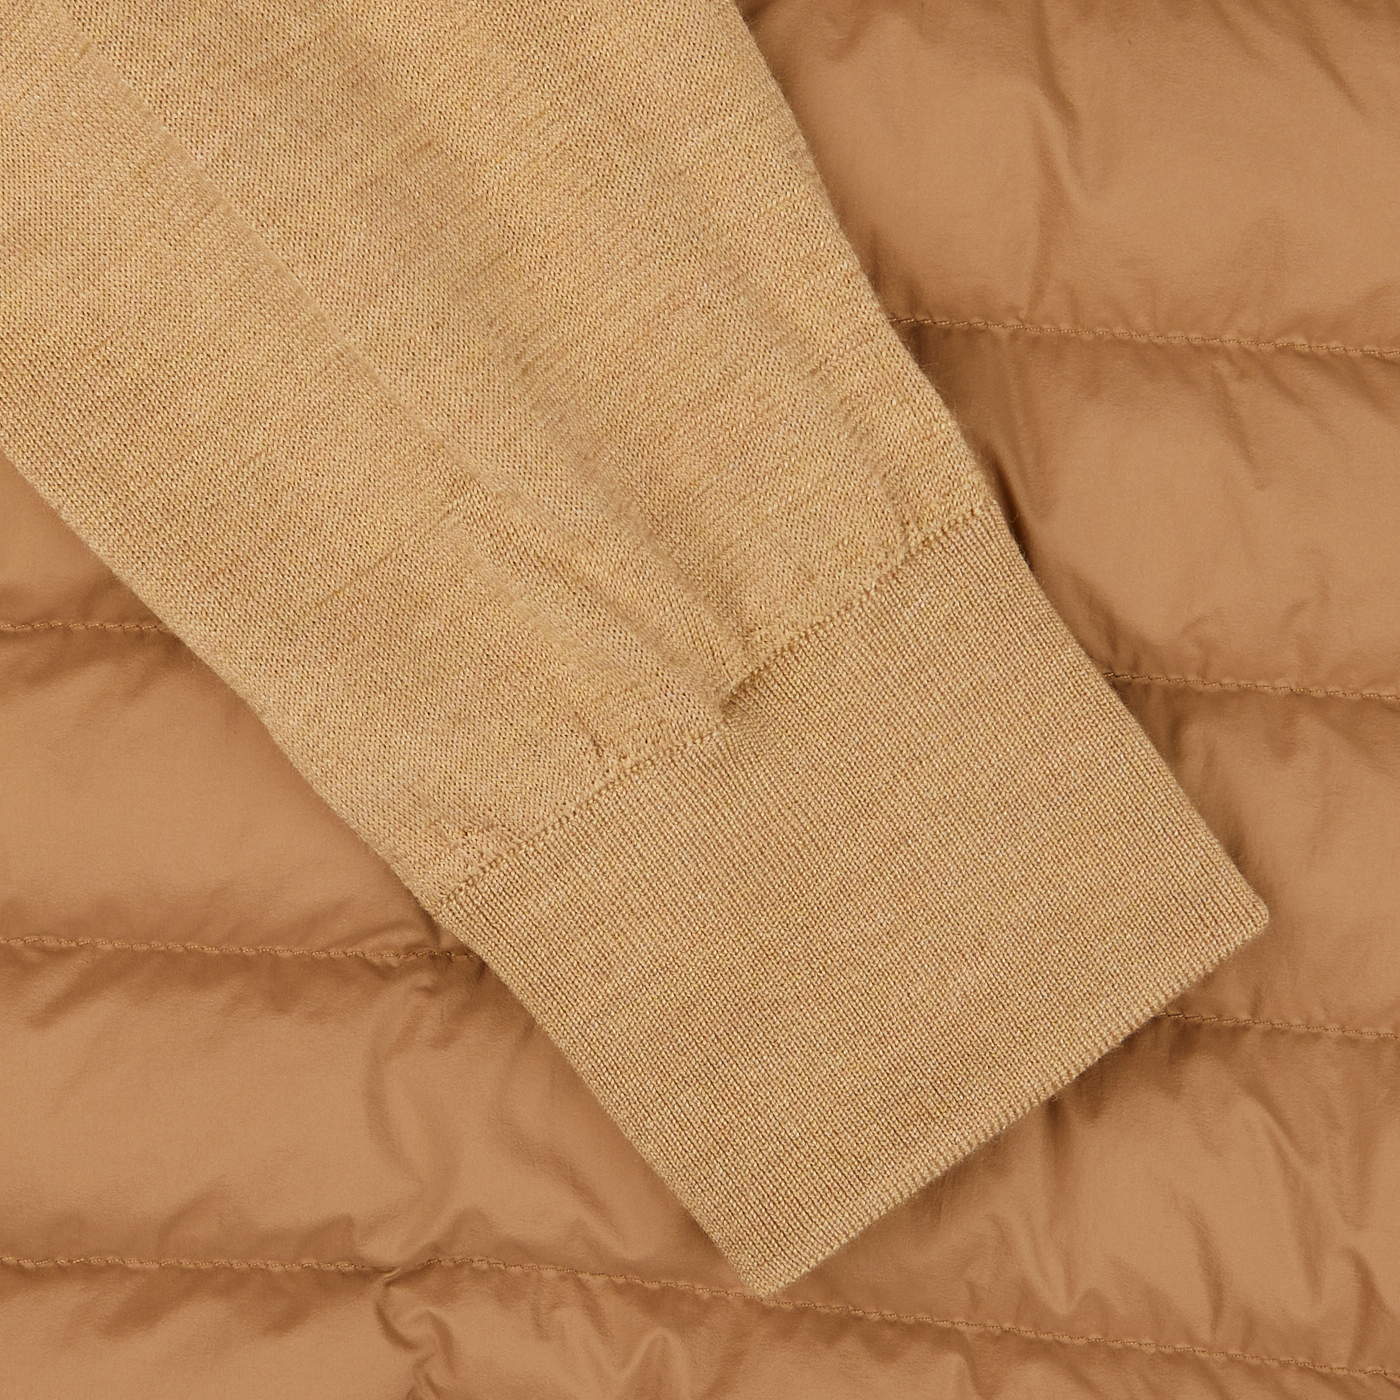 Close-up of a frayed Light Camel Wool Silk Nylon Padded Jacket cuff by Herno against a padded brown background.